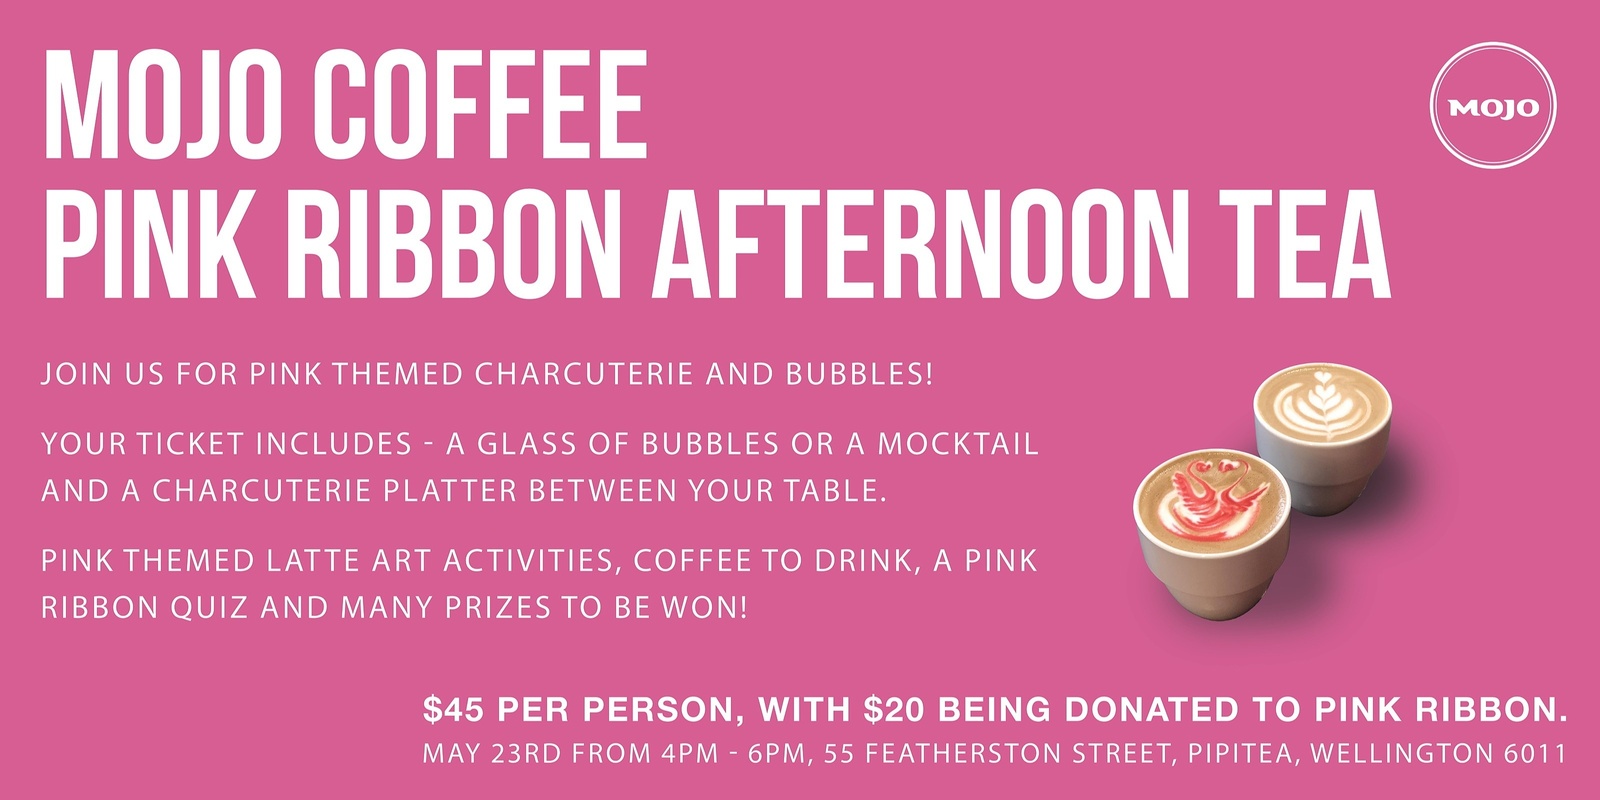 Banner image for Mojo Coffee Pink Ribbon Afternoon Tea